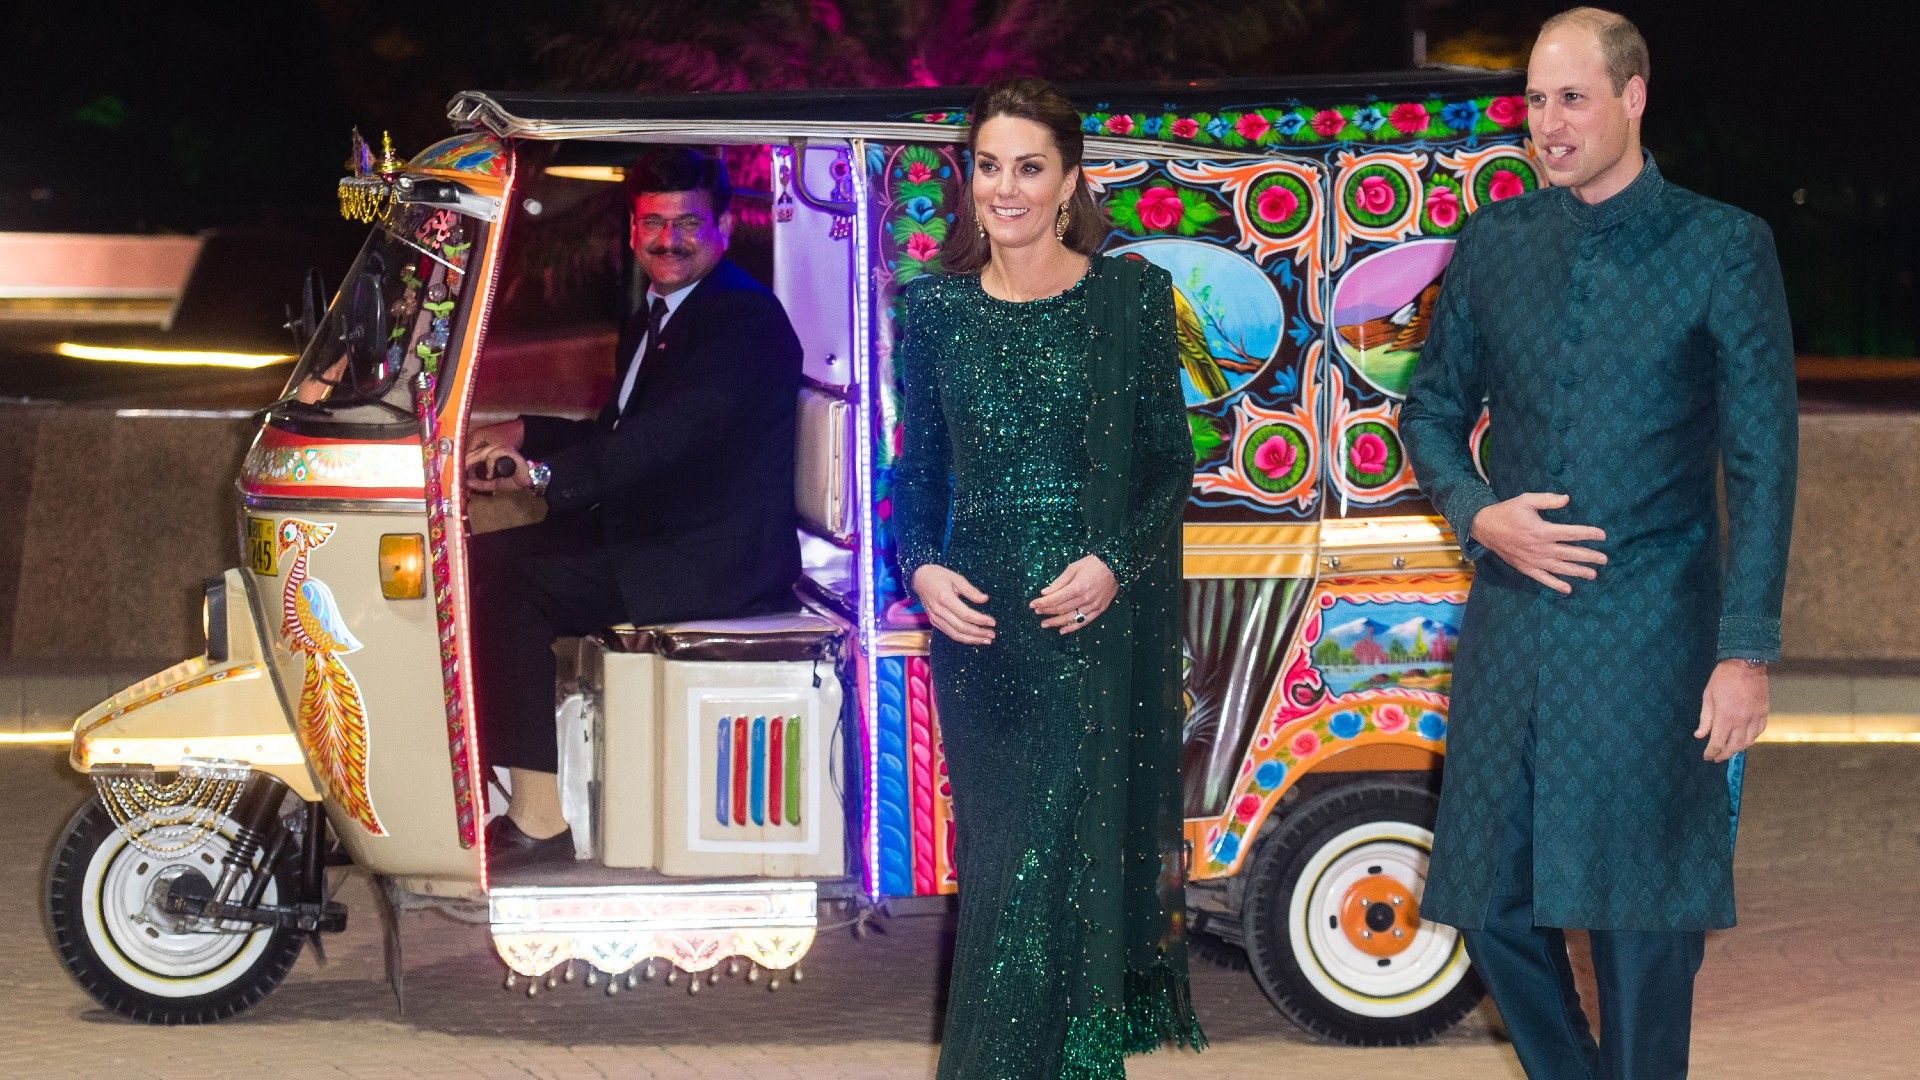 <p>                     Prince William and Kate Middleton are used to travelling in all manners of transport - royal carriages, planes, even motorbikes (a passion of Williams!).                   </p>                                      <p>                     But perhaps nobody ever expected to see them arrive in a decorated tuk tuk, making it one of their most memorable entrances ever.                   </p>                                      <p>                     During the second day of their 2019 tour of Pakistan, the Prince and Princess of Wales attended a special reception hosted by the British High Commissioner Thomas Drew, at the Pakistan National Monument.                   </p>                                      <p>                     For the first time perhaps ever, William was challenging Kate in the style stakes. While she dazzled in emerald green, William cut a distinctive figure in a traditional Sherwani.                   </p>